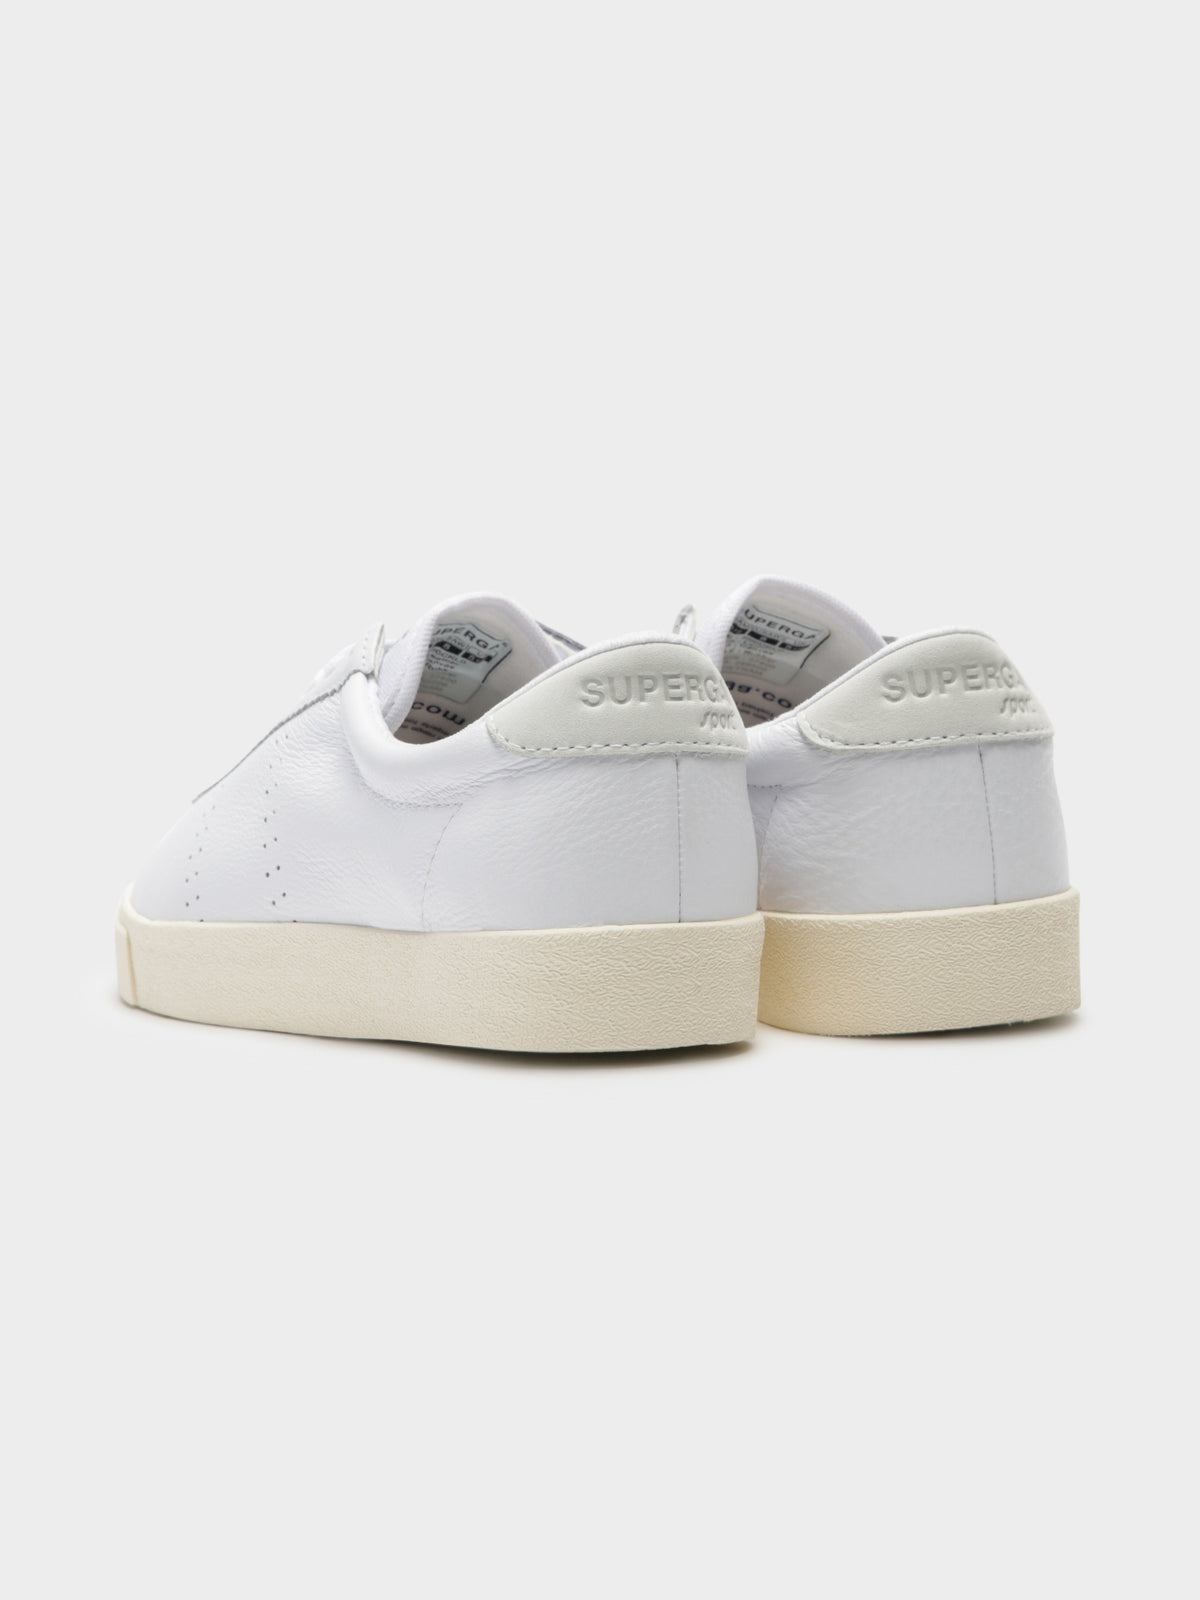 Unisex 2843 Comfort Leather Sneakers in White